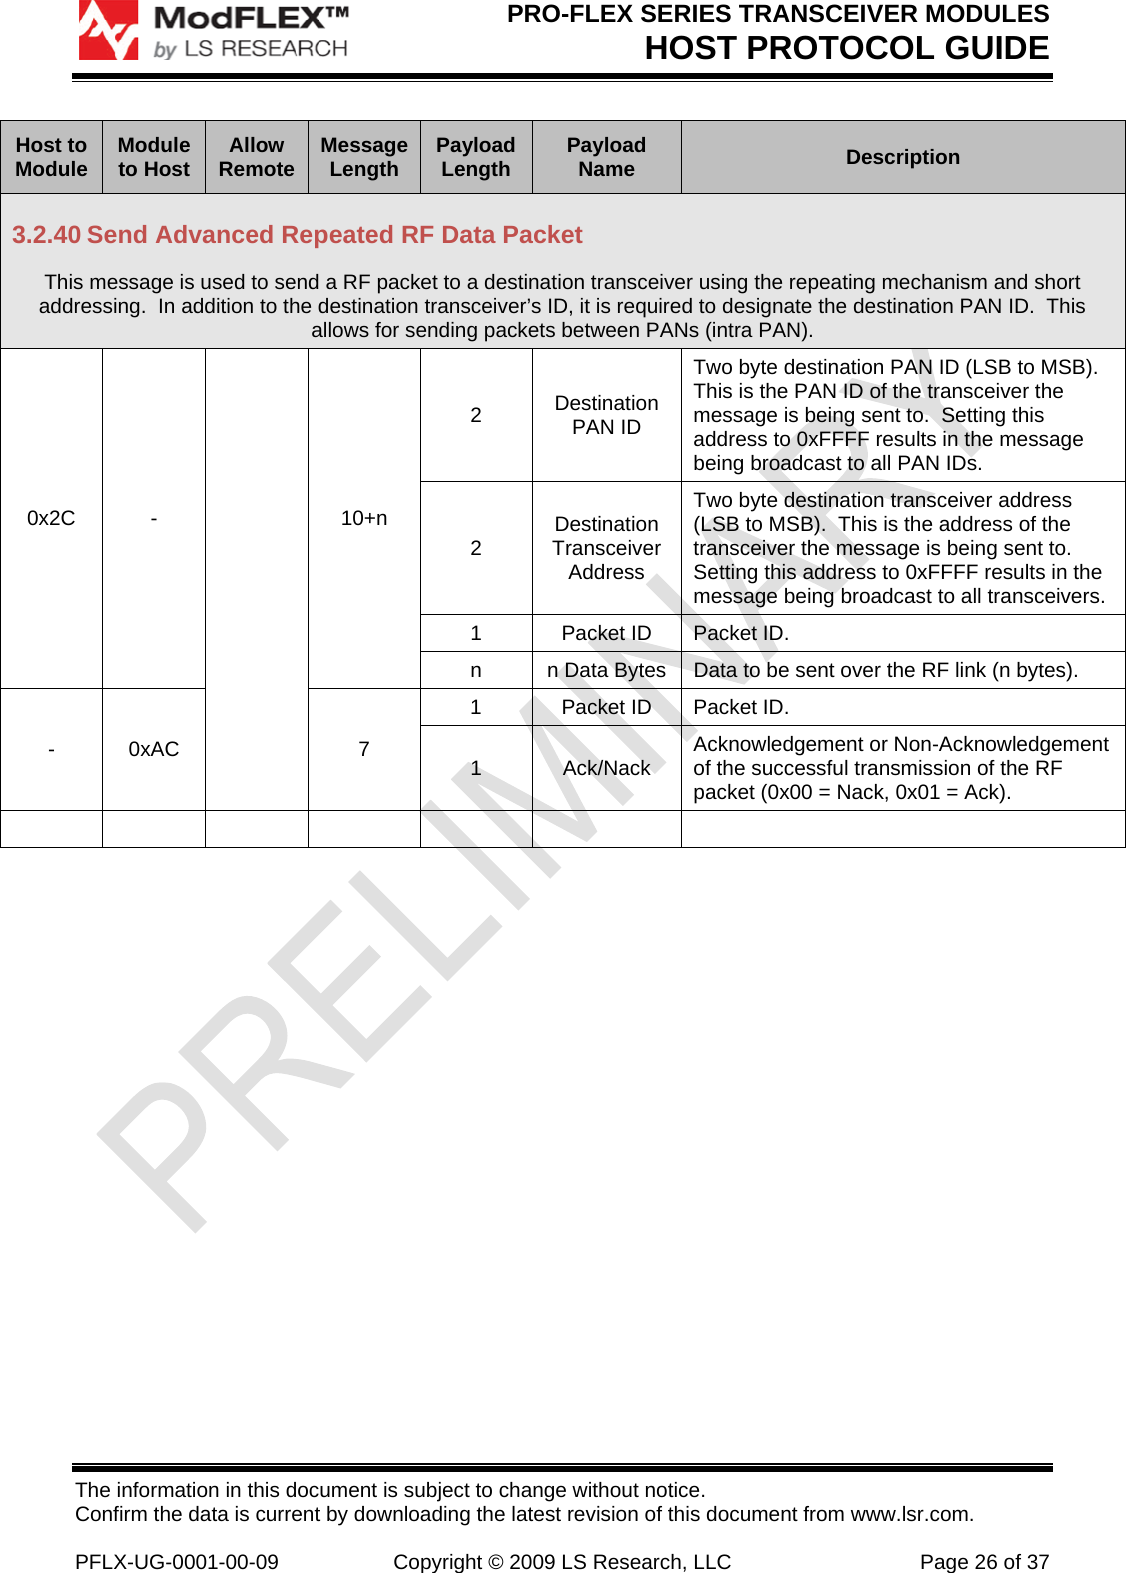 PRO-FLEX SERIES TRANSCEIVER MODULES HOST PROTOCOL GUIDE The information in this document is subject to change without notice. Confirm the data is current by downloading the latest revision of this document from www.lsr.com.  PFLX-UG-0001-00-09  Copyright © 2009 LS Research, LLC  Page 26 of 37 Host to Module  Module to Host  Allow Remote  Message Length  Payload Length  Payload Name  Description 3.2.40 Send Advanced Repeated RF Data Packet This message is used to send a RF packet to a destination transceiver using the repeating mechanism and short addressing.  In addition to the destination transceiver’s ID, it is required to designate the destination PAN ID.  This allows for sending packets between PANs (intra PAN). 0x2C -  10+n 2  Destination PAN ID Two byte destination PAN ID (LSB to MSB).  This is the PAN ID of the transceiver the message is being sent to.  Setting this address to 0xFFFF results in the message being broadcast to all PAN IDs. 2  Destination Transceiver Address Two byte destination transceiver address (LSB to MSB).  This is the address of the transceiver the message is being sent to.  Setting this address to 0xFFFF results in the message being broadcast to all transceivers. 1  Packet ID  Packet ID. n  n Data Bytes  Data to be sent over the RF link (n bytes). - 0xAC  7 1  Packet ID  Packet ID. 1 Ack/Nack Acknowledgement or Non-Acknowledgement of the successful transmission of the RF packet (0x00 = Nack, 0x01 = Ack).           